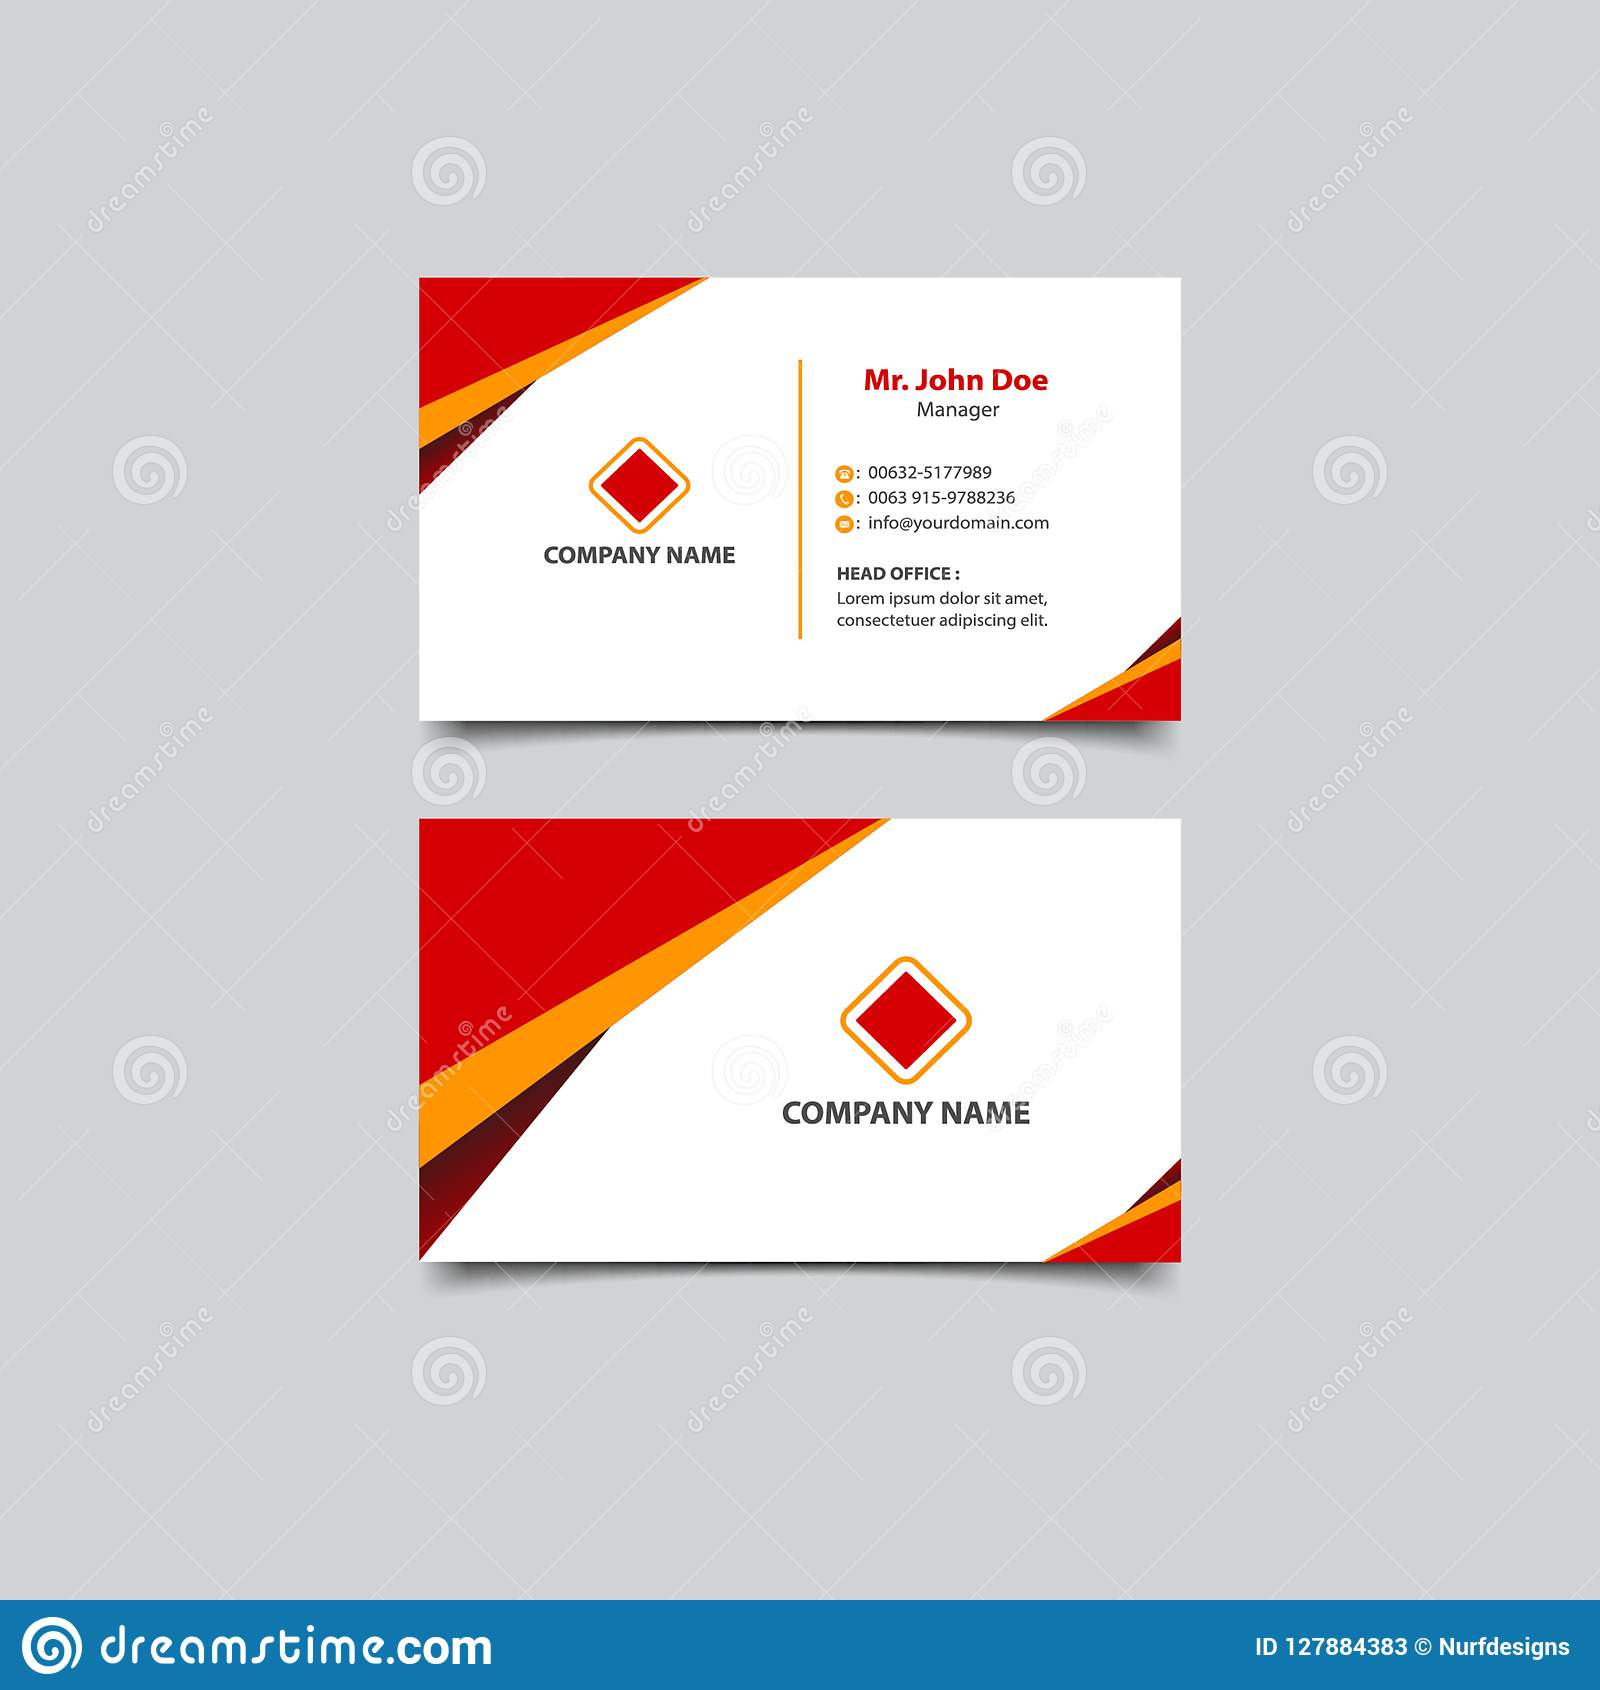 Simple And Modern Business Card Template Design Stock Vector Throughout Modern Business Card Design Templates